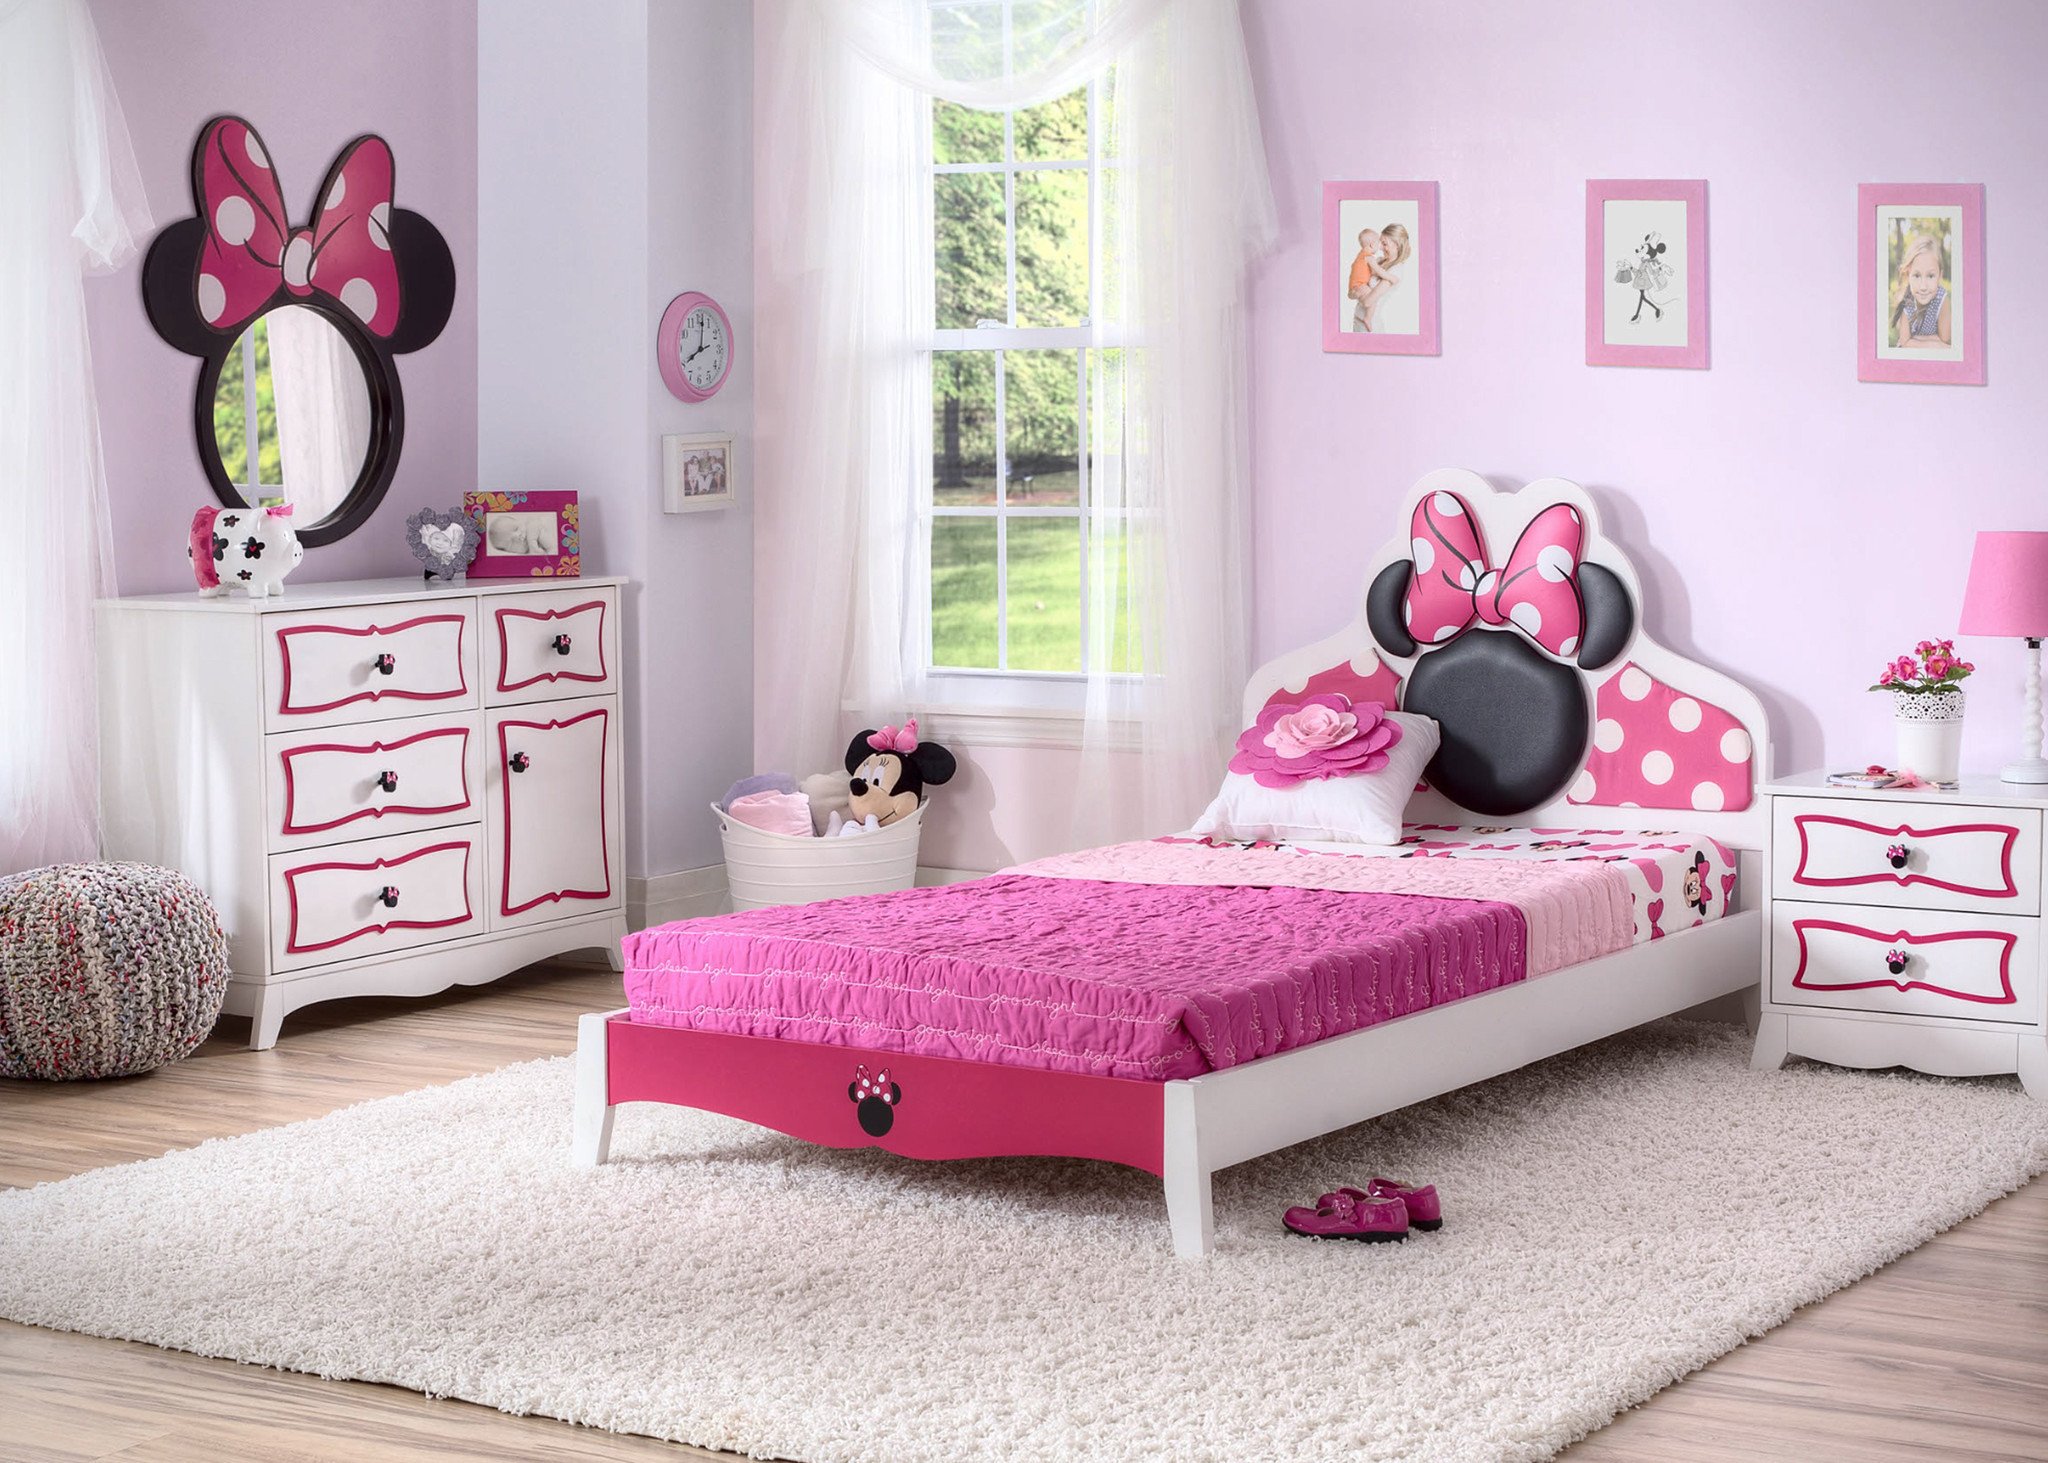 Minnie Mouse Bedroom Set Luxury Take A Look at these Awesome Minnie Mouse Bedroom Items